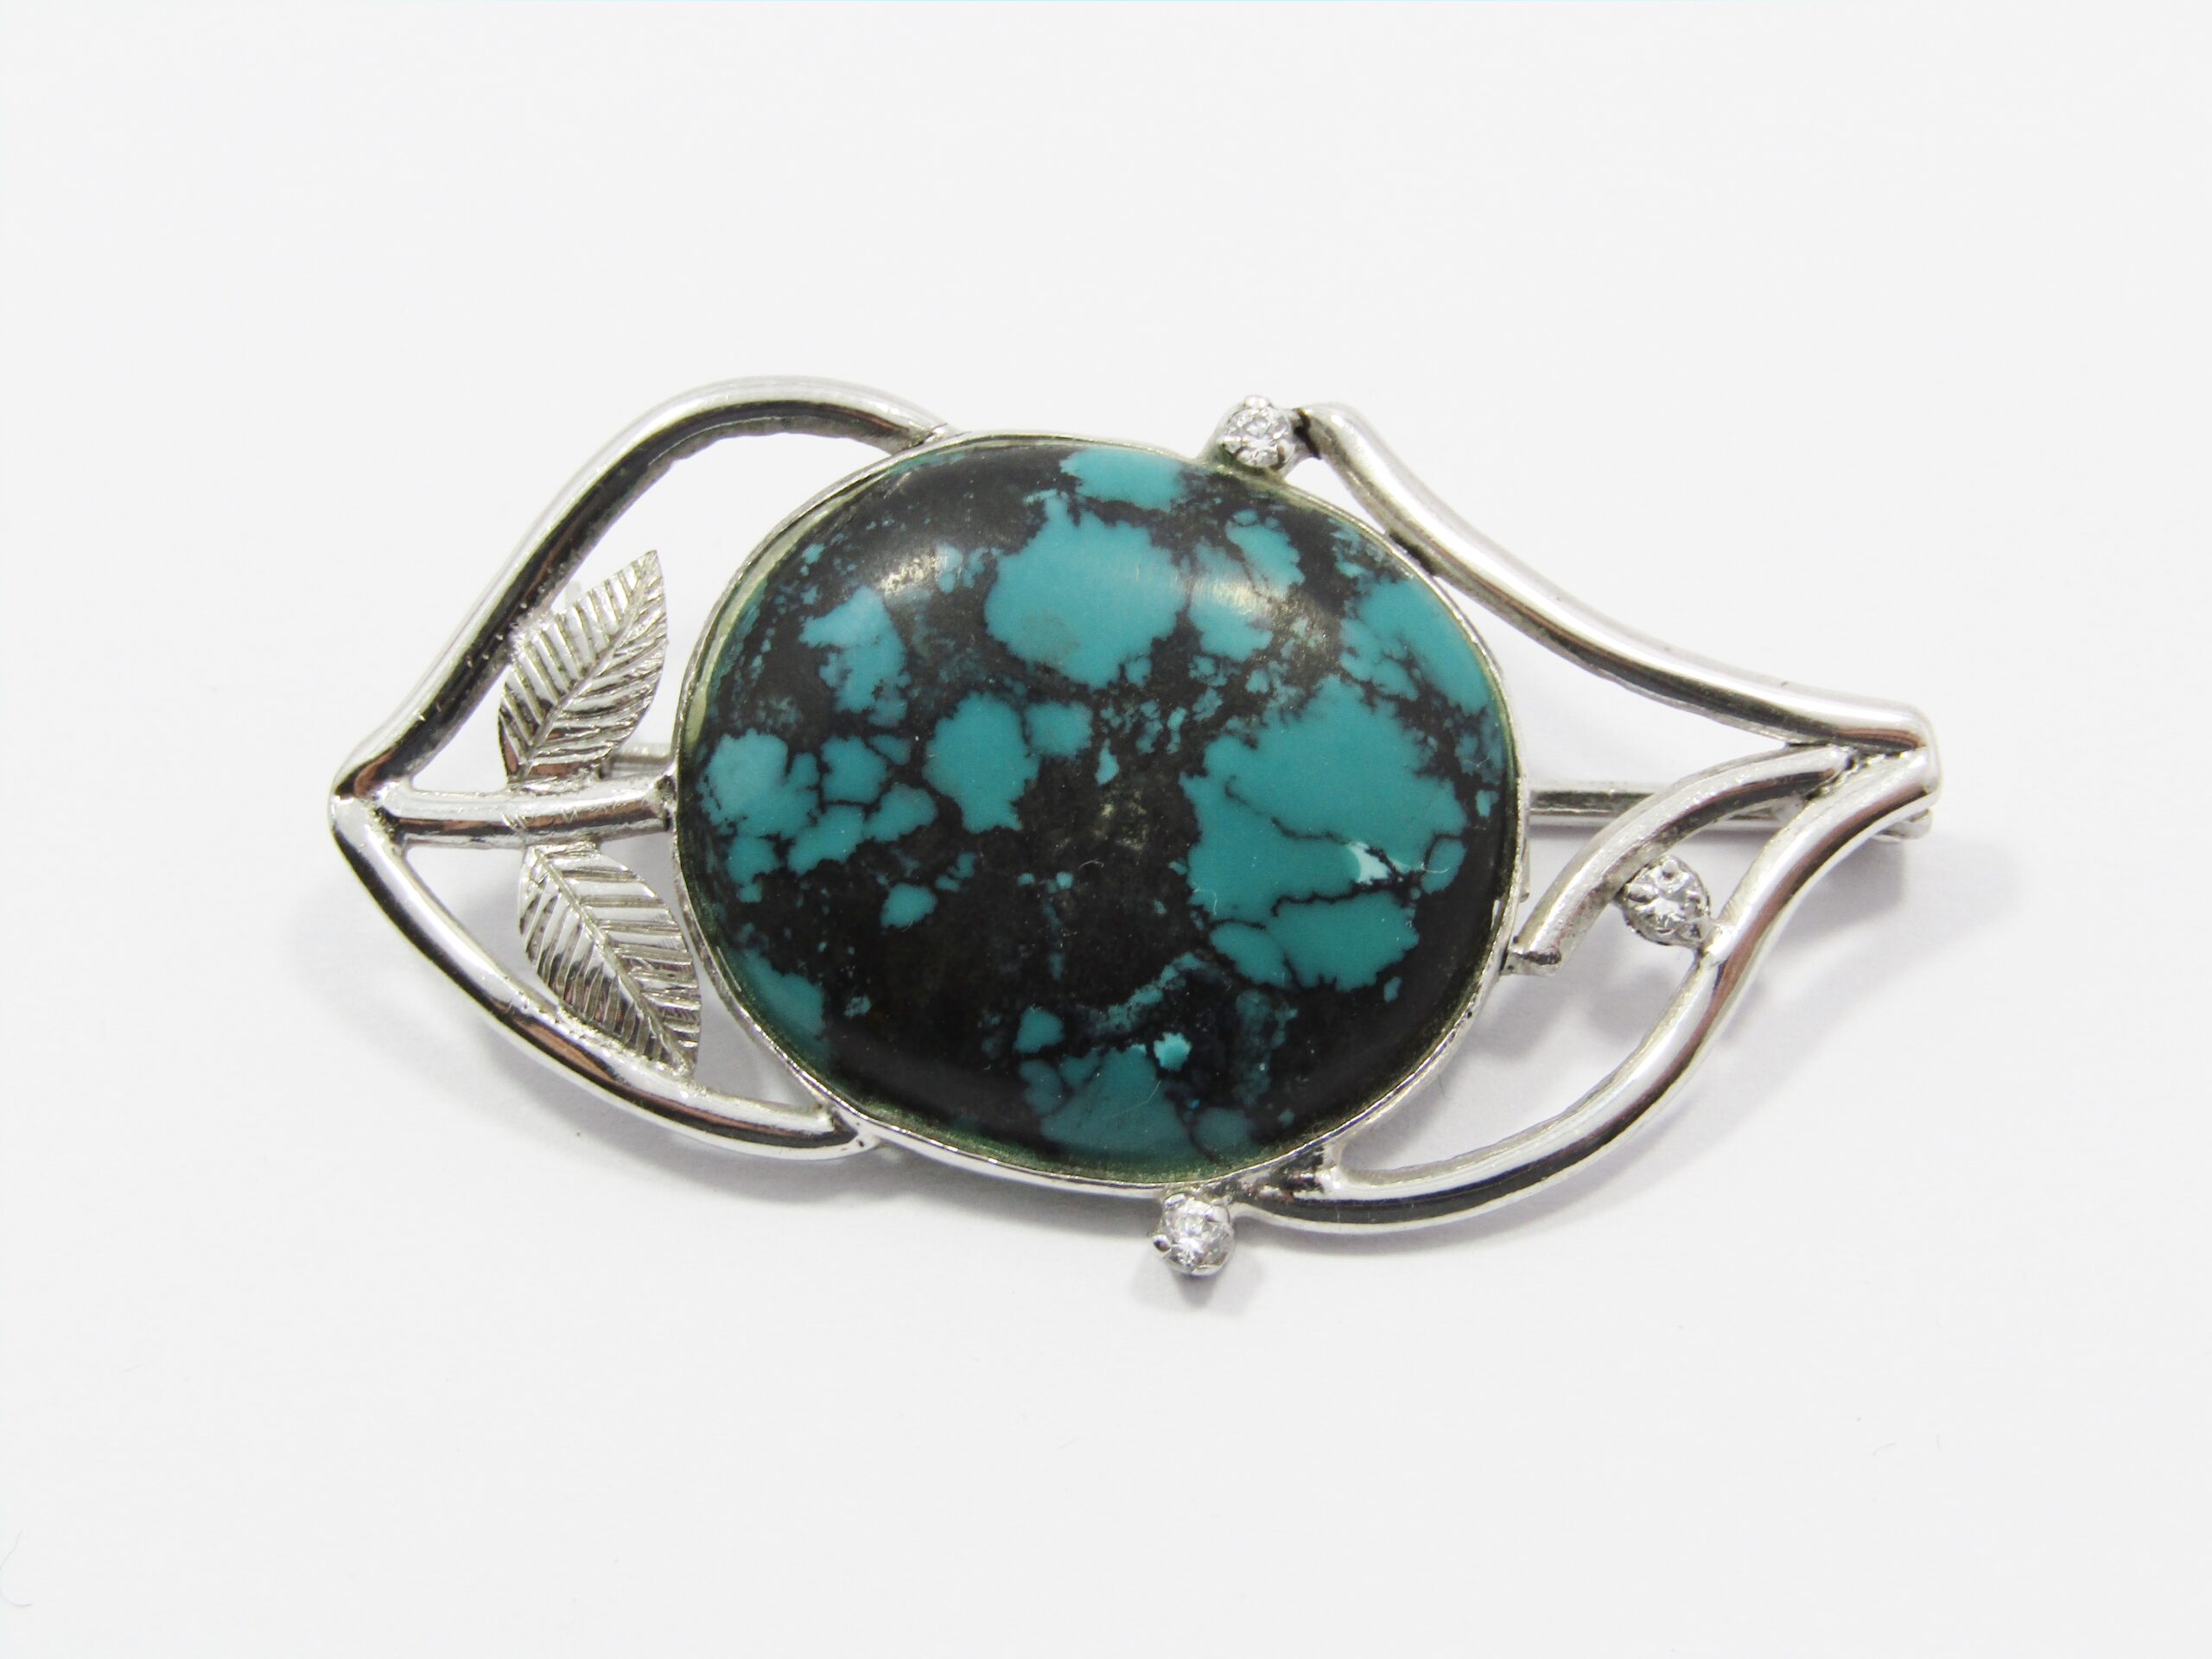 A Stunning Brooch With a Large Faux Turquois Stone in Sterling Silver.